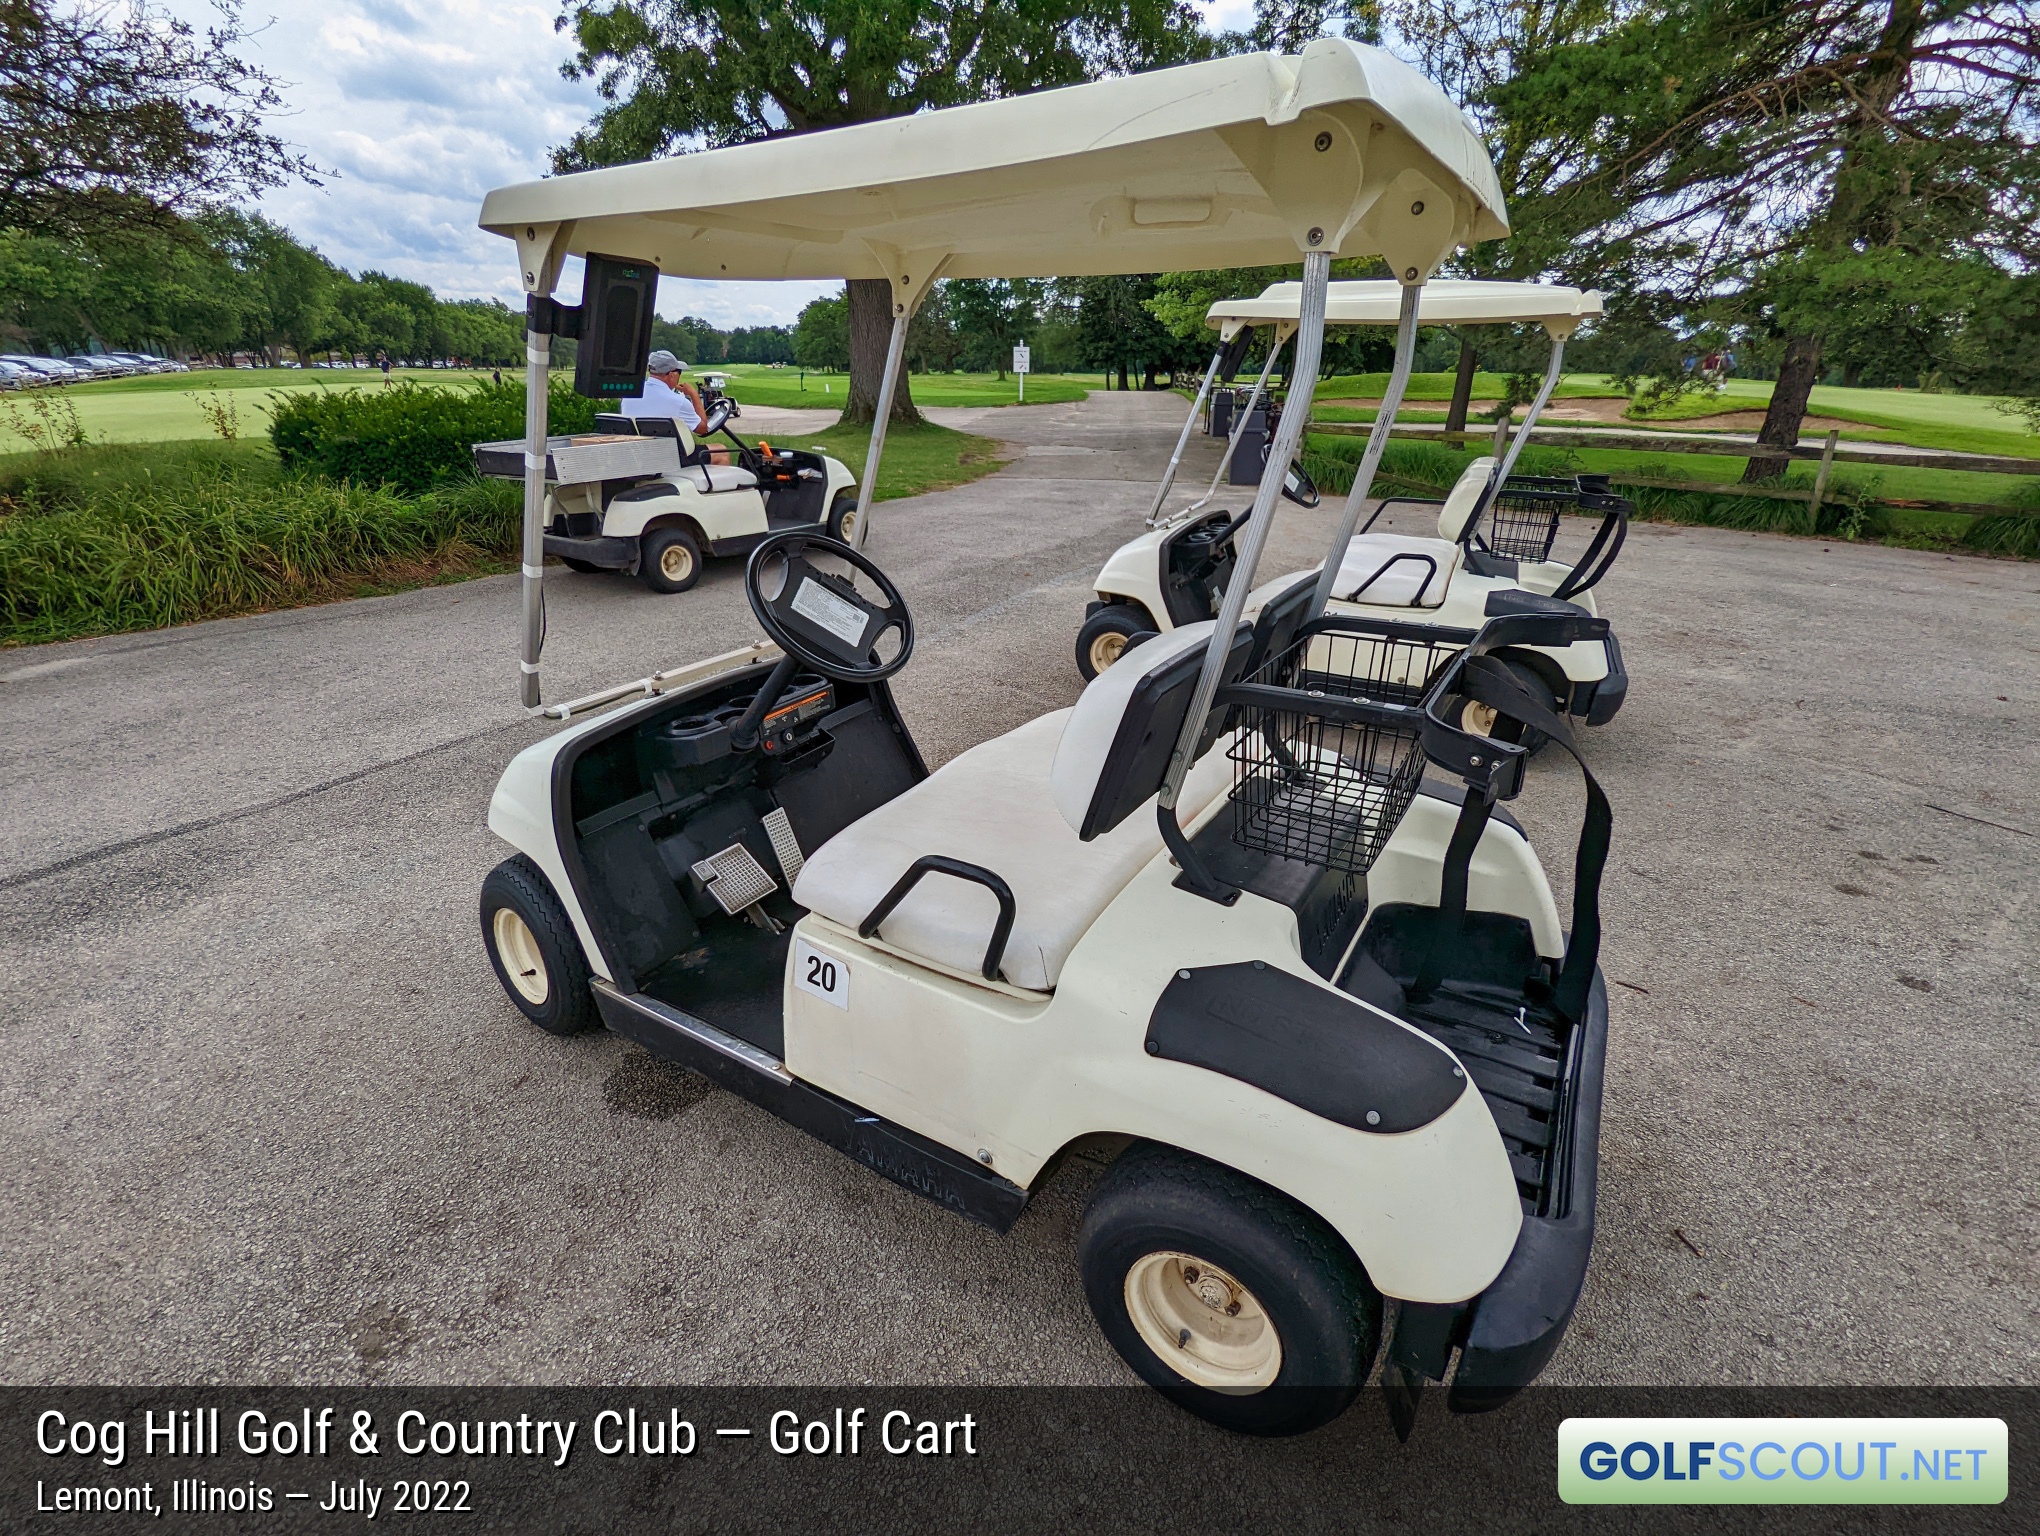 Photo of the golf carts at Cog Hill Course #3 in Lemont, Illinois. The golf carts on courses 1 and 3 do not have GPS. Courses 2 and 4 have that.